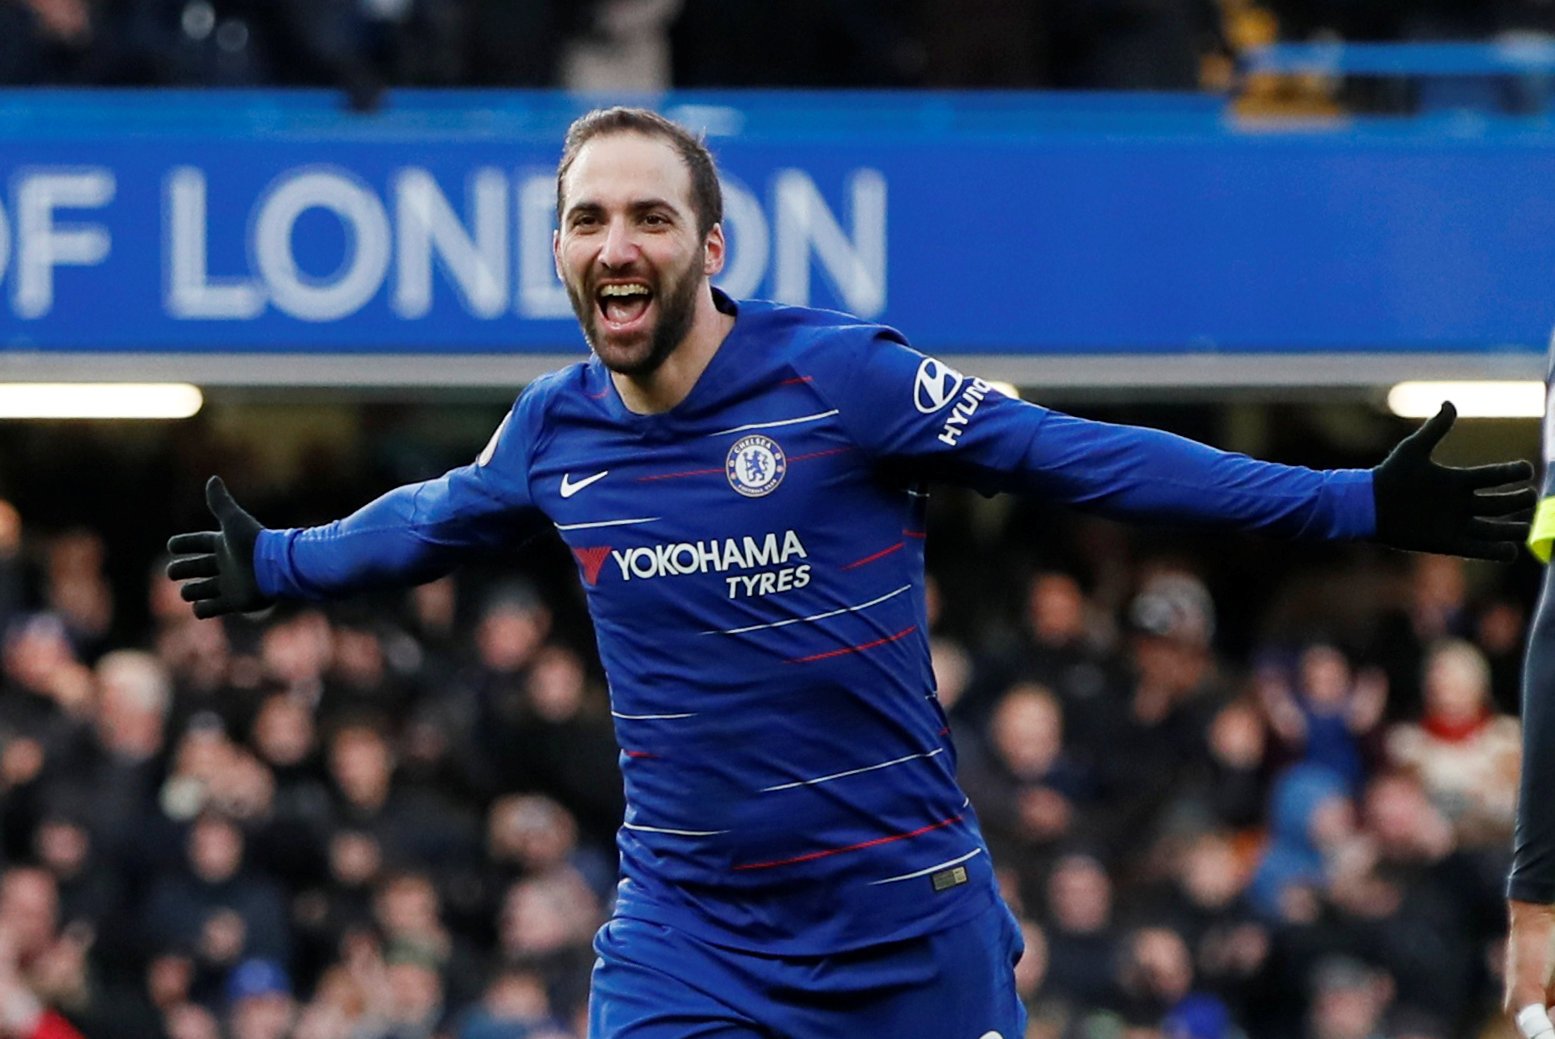 Why Higuain will flop at Chelsea